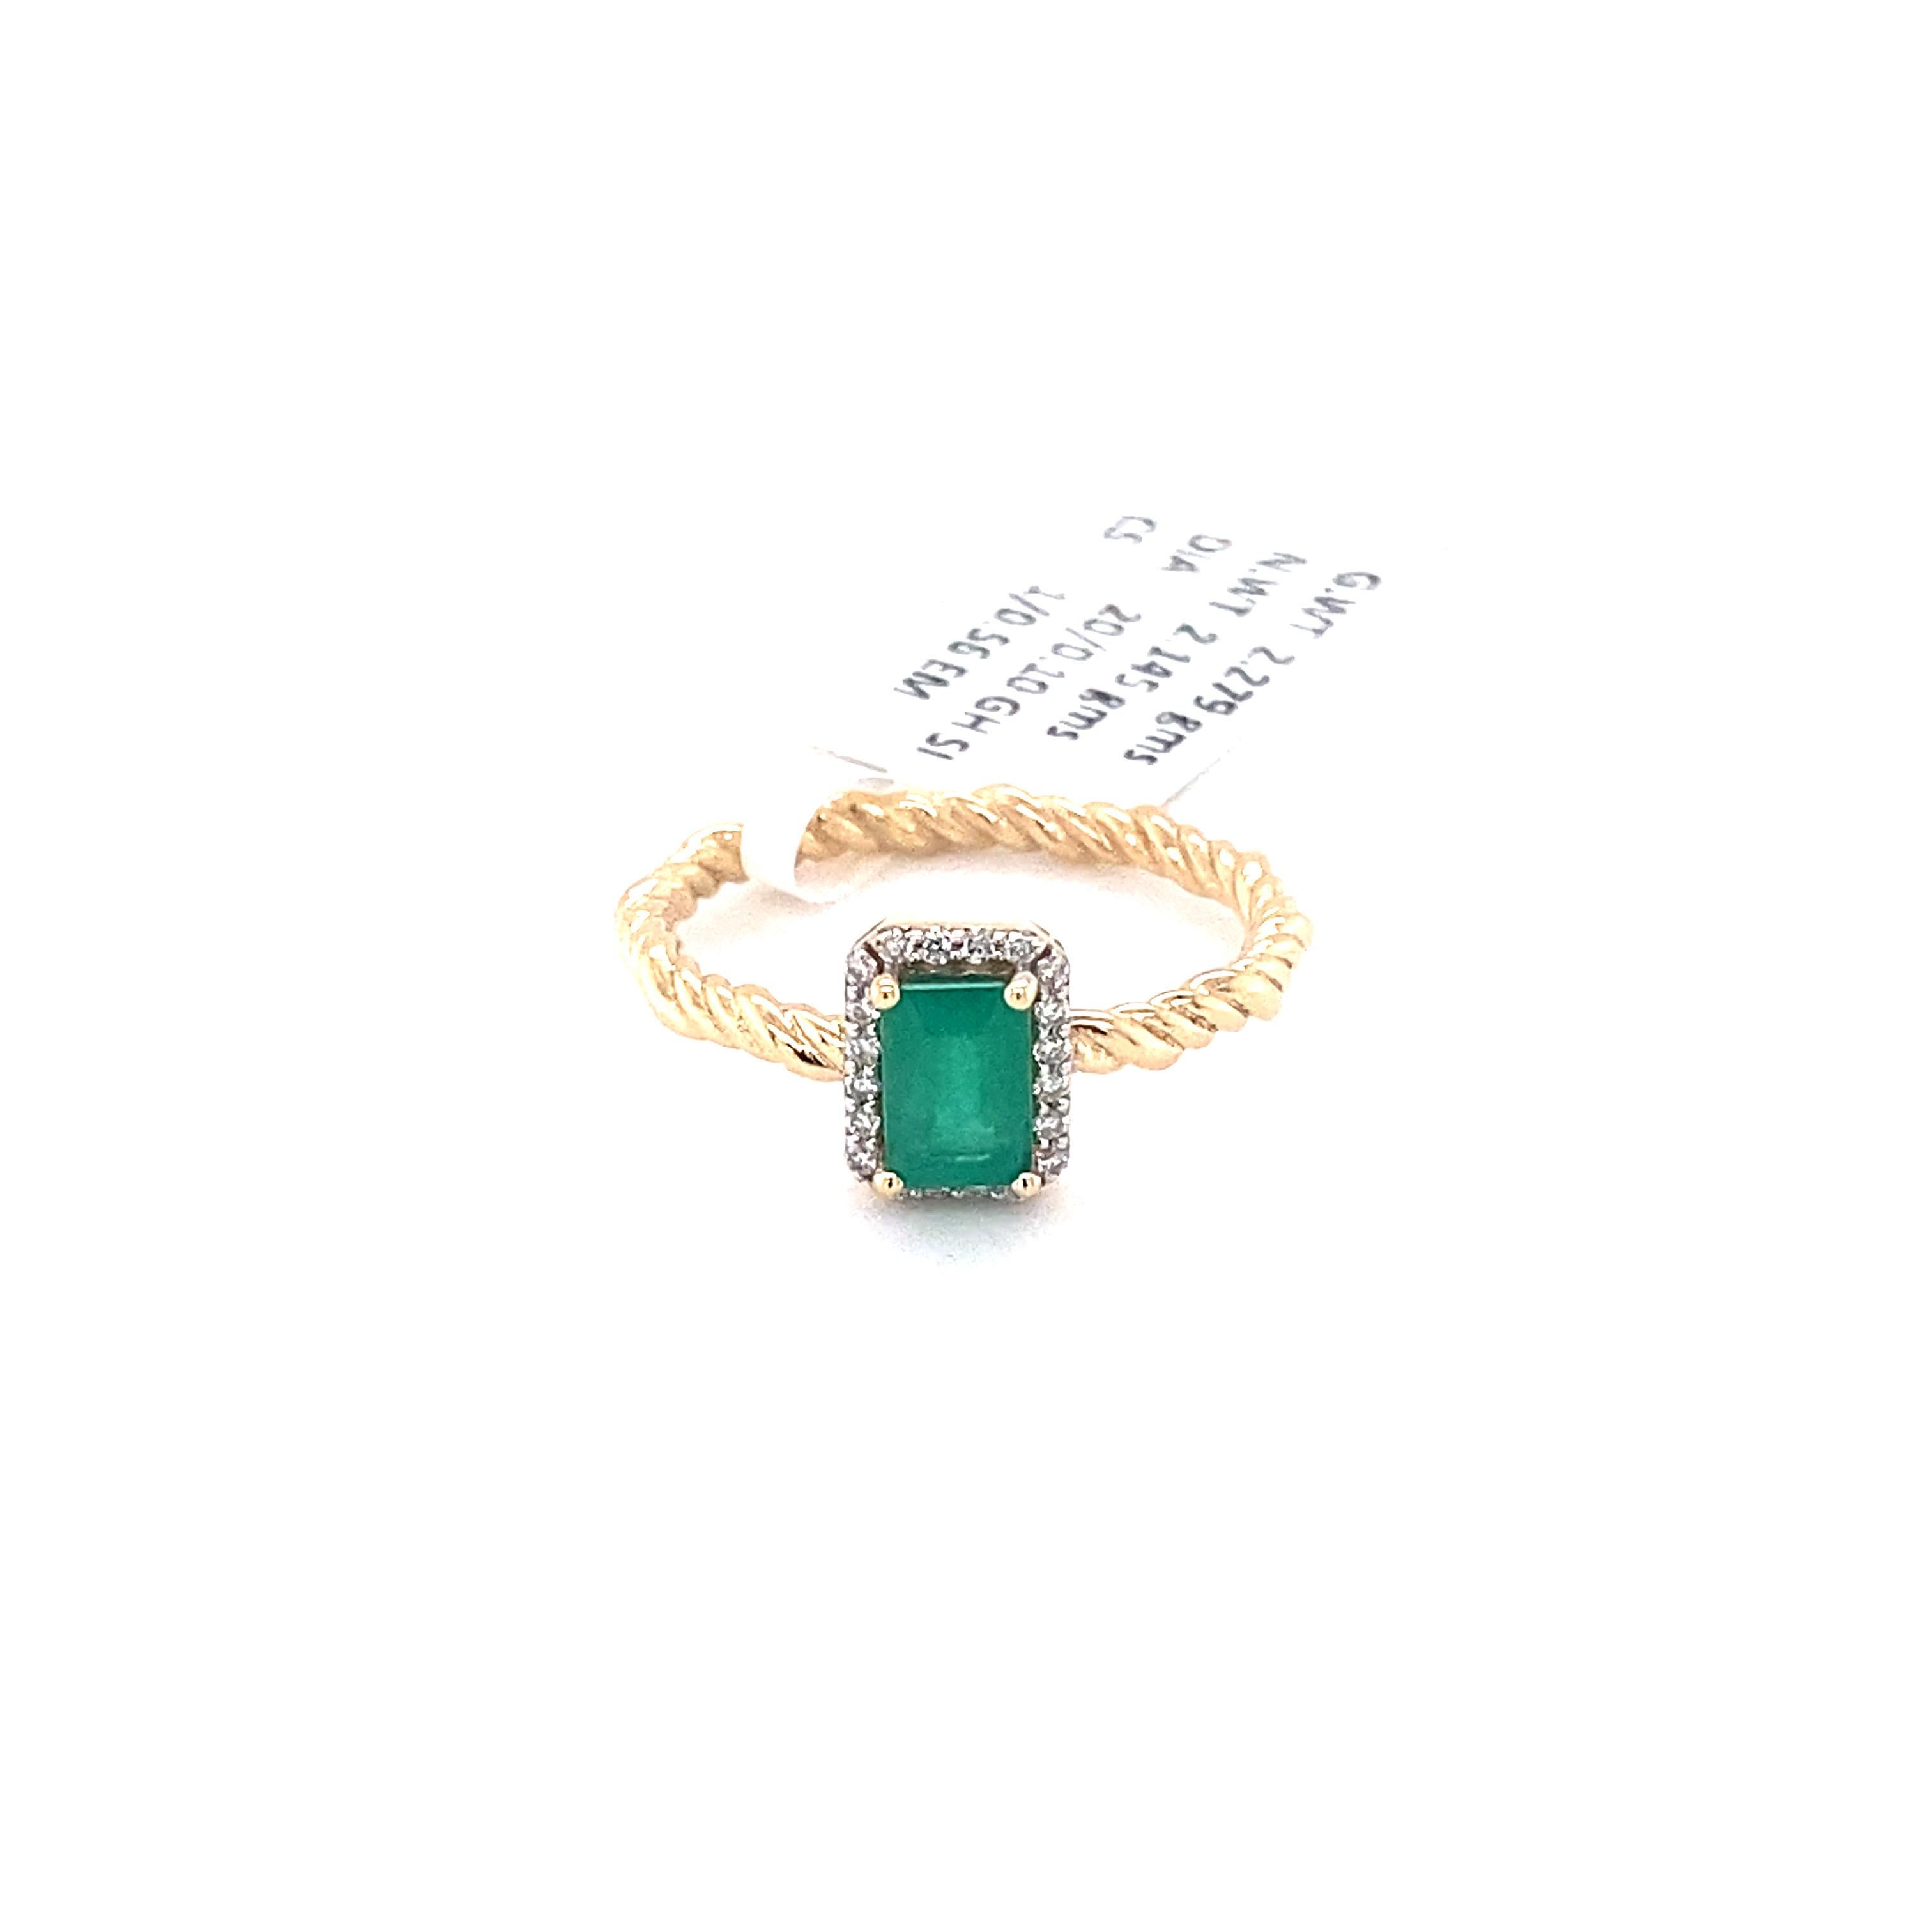 Natural Gemstone Solitaire Ring

** Each ring is sold separately **

-Crafted in 14k solid gold with NATURAL AND GENUINE Gemstones and Diamonds
- Choice of center stone:  Natural Ruby, Sapphire and Emerald
- Perfect for stacking or wearing solo
- A